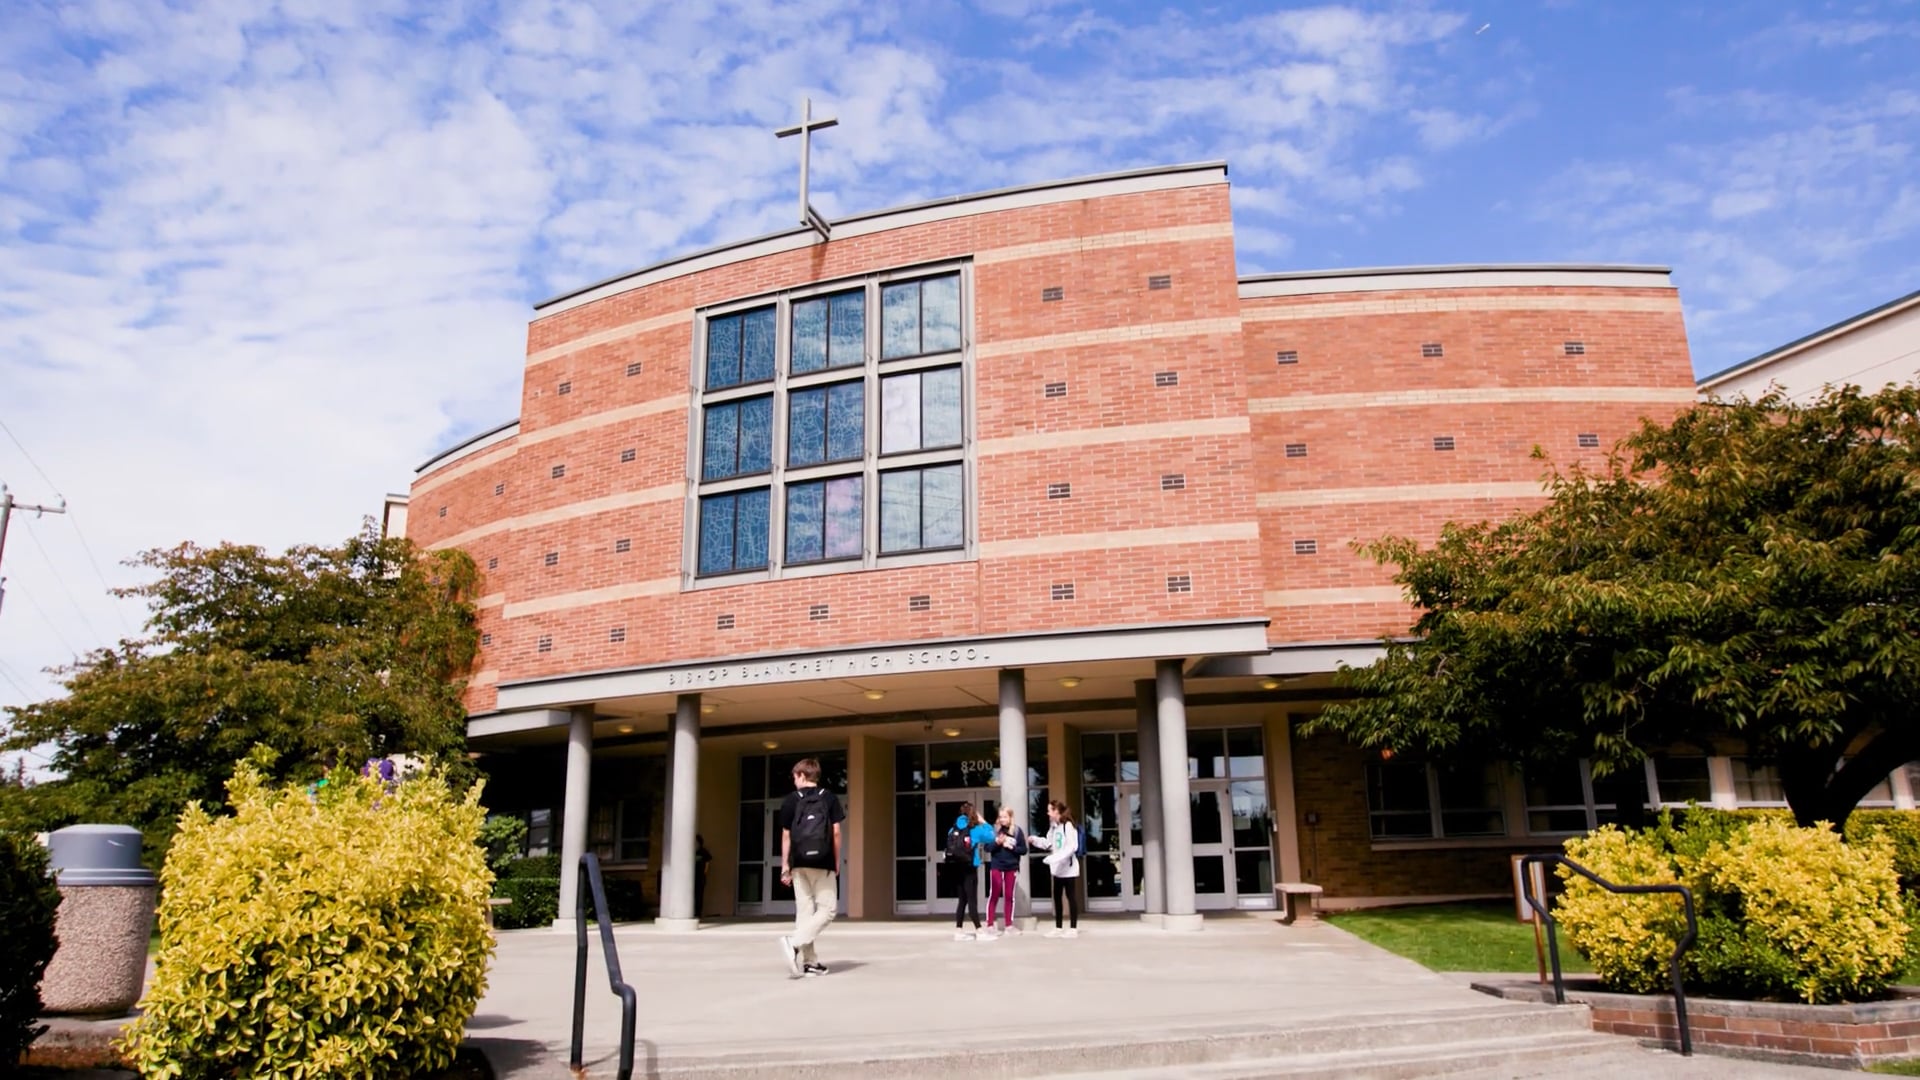 Blanchet High School Educational Institution Admissions (2018